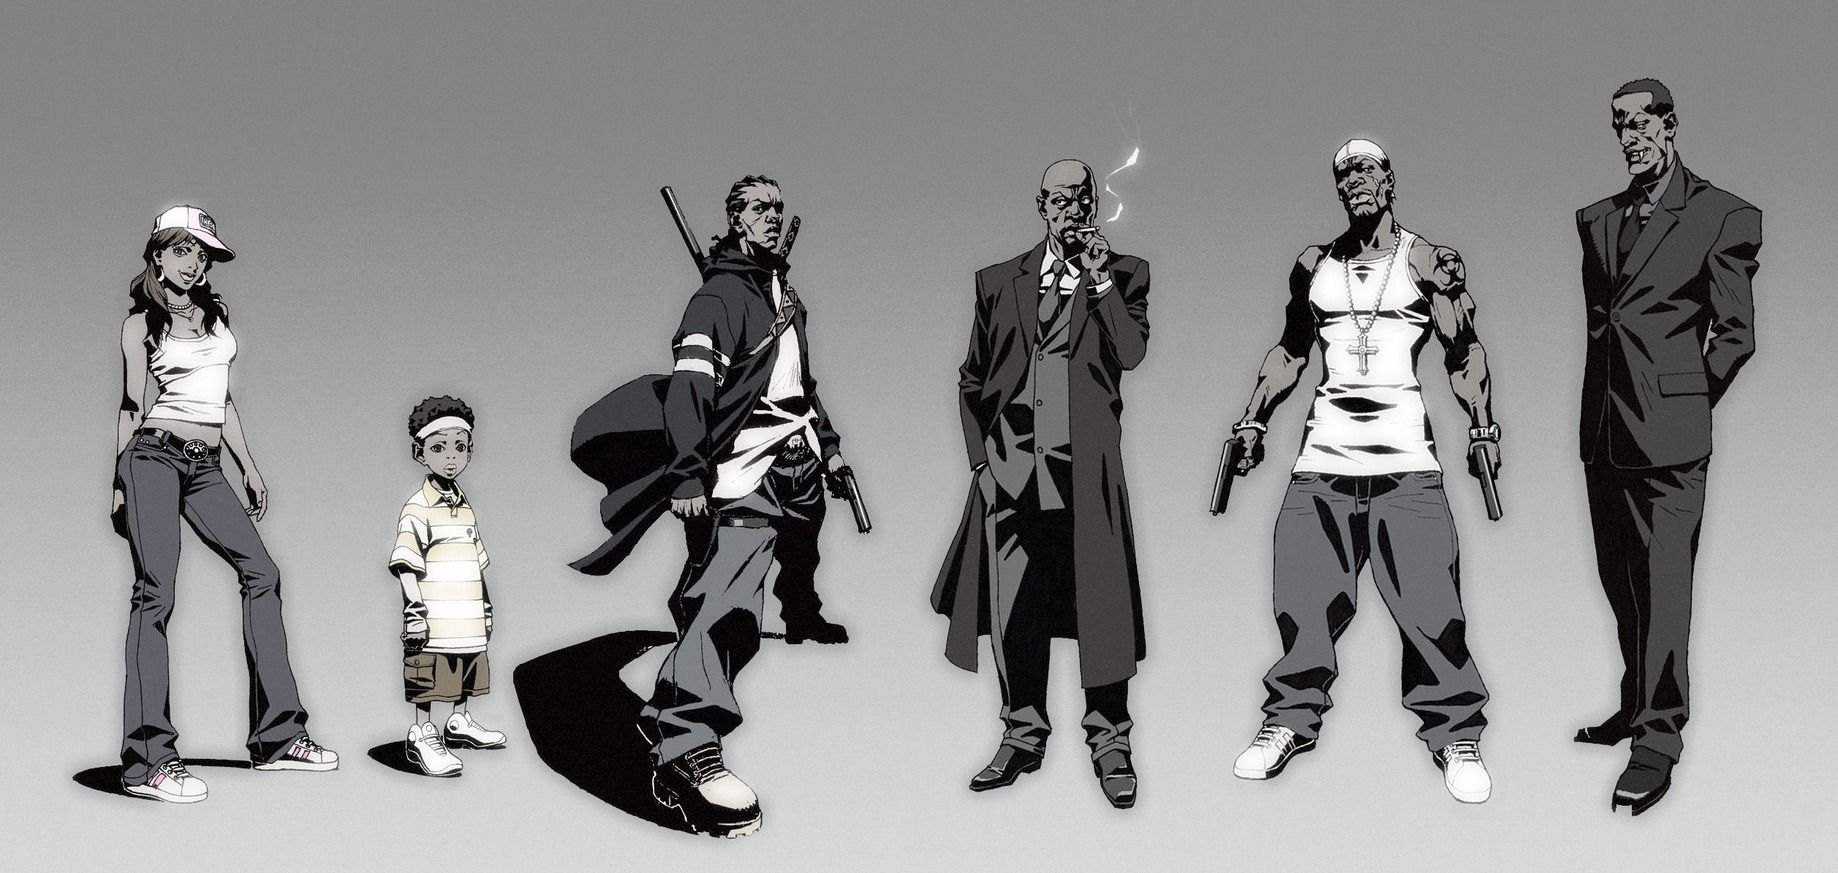 Character_line_up_by_kse332.jpg